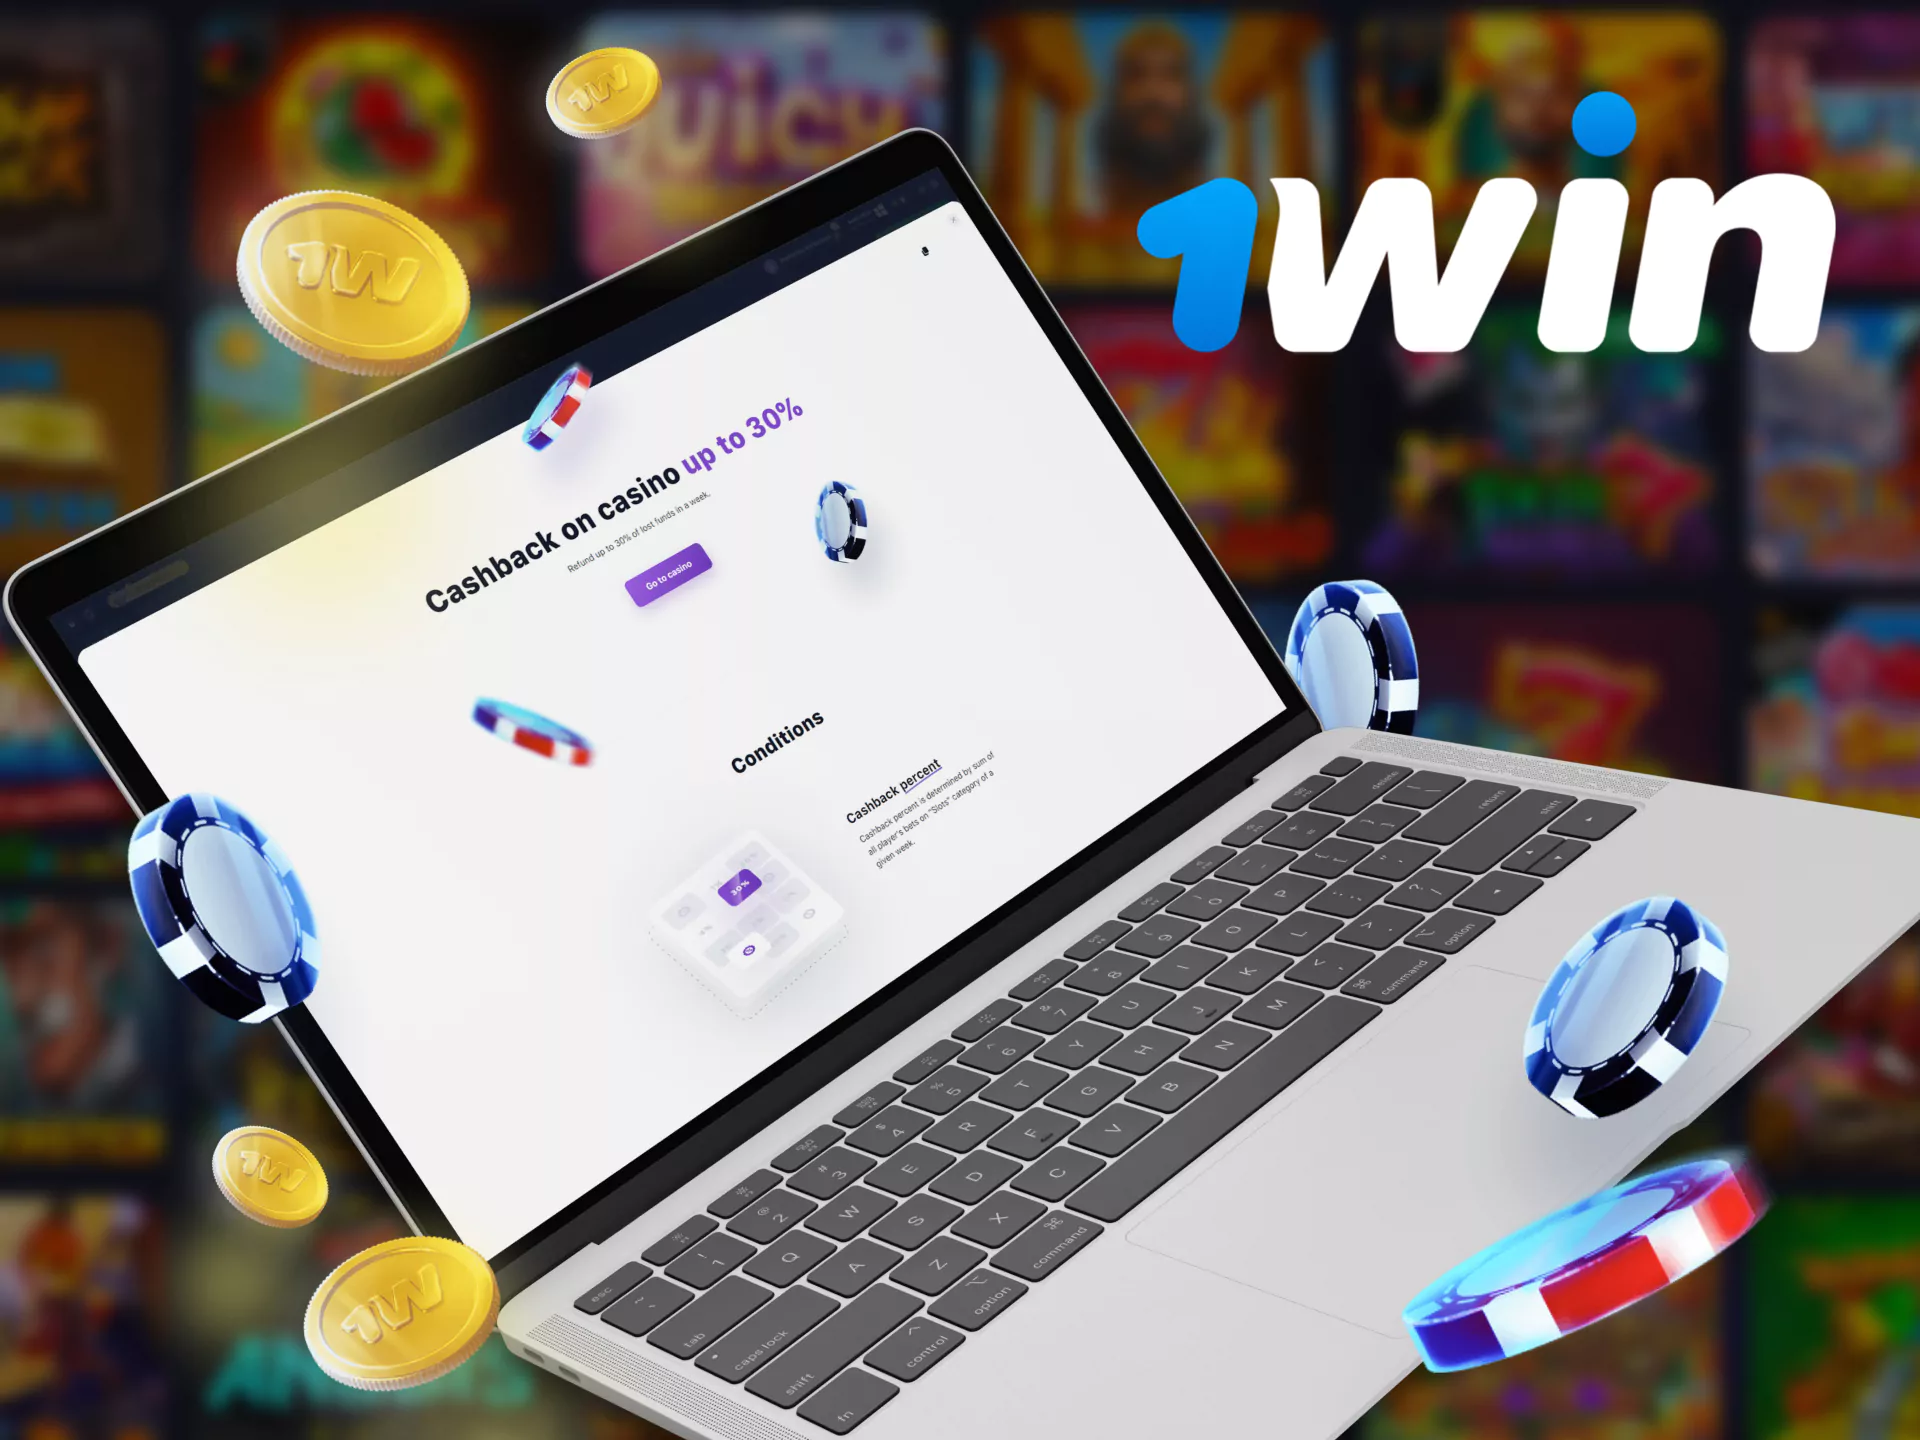 On 1Win there is a special bonus with cashback for the casino.